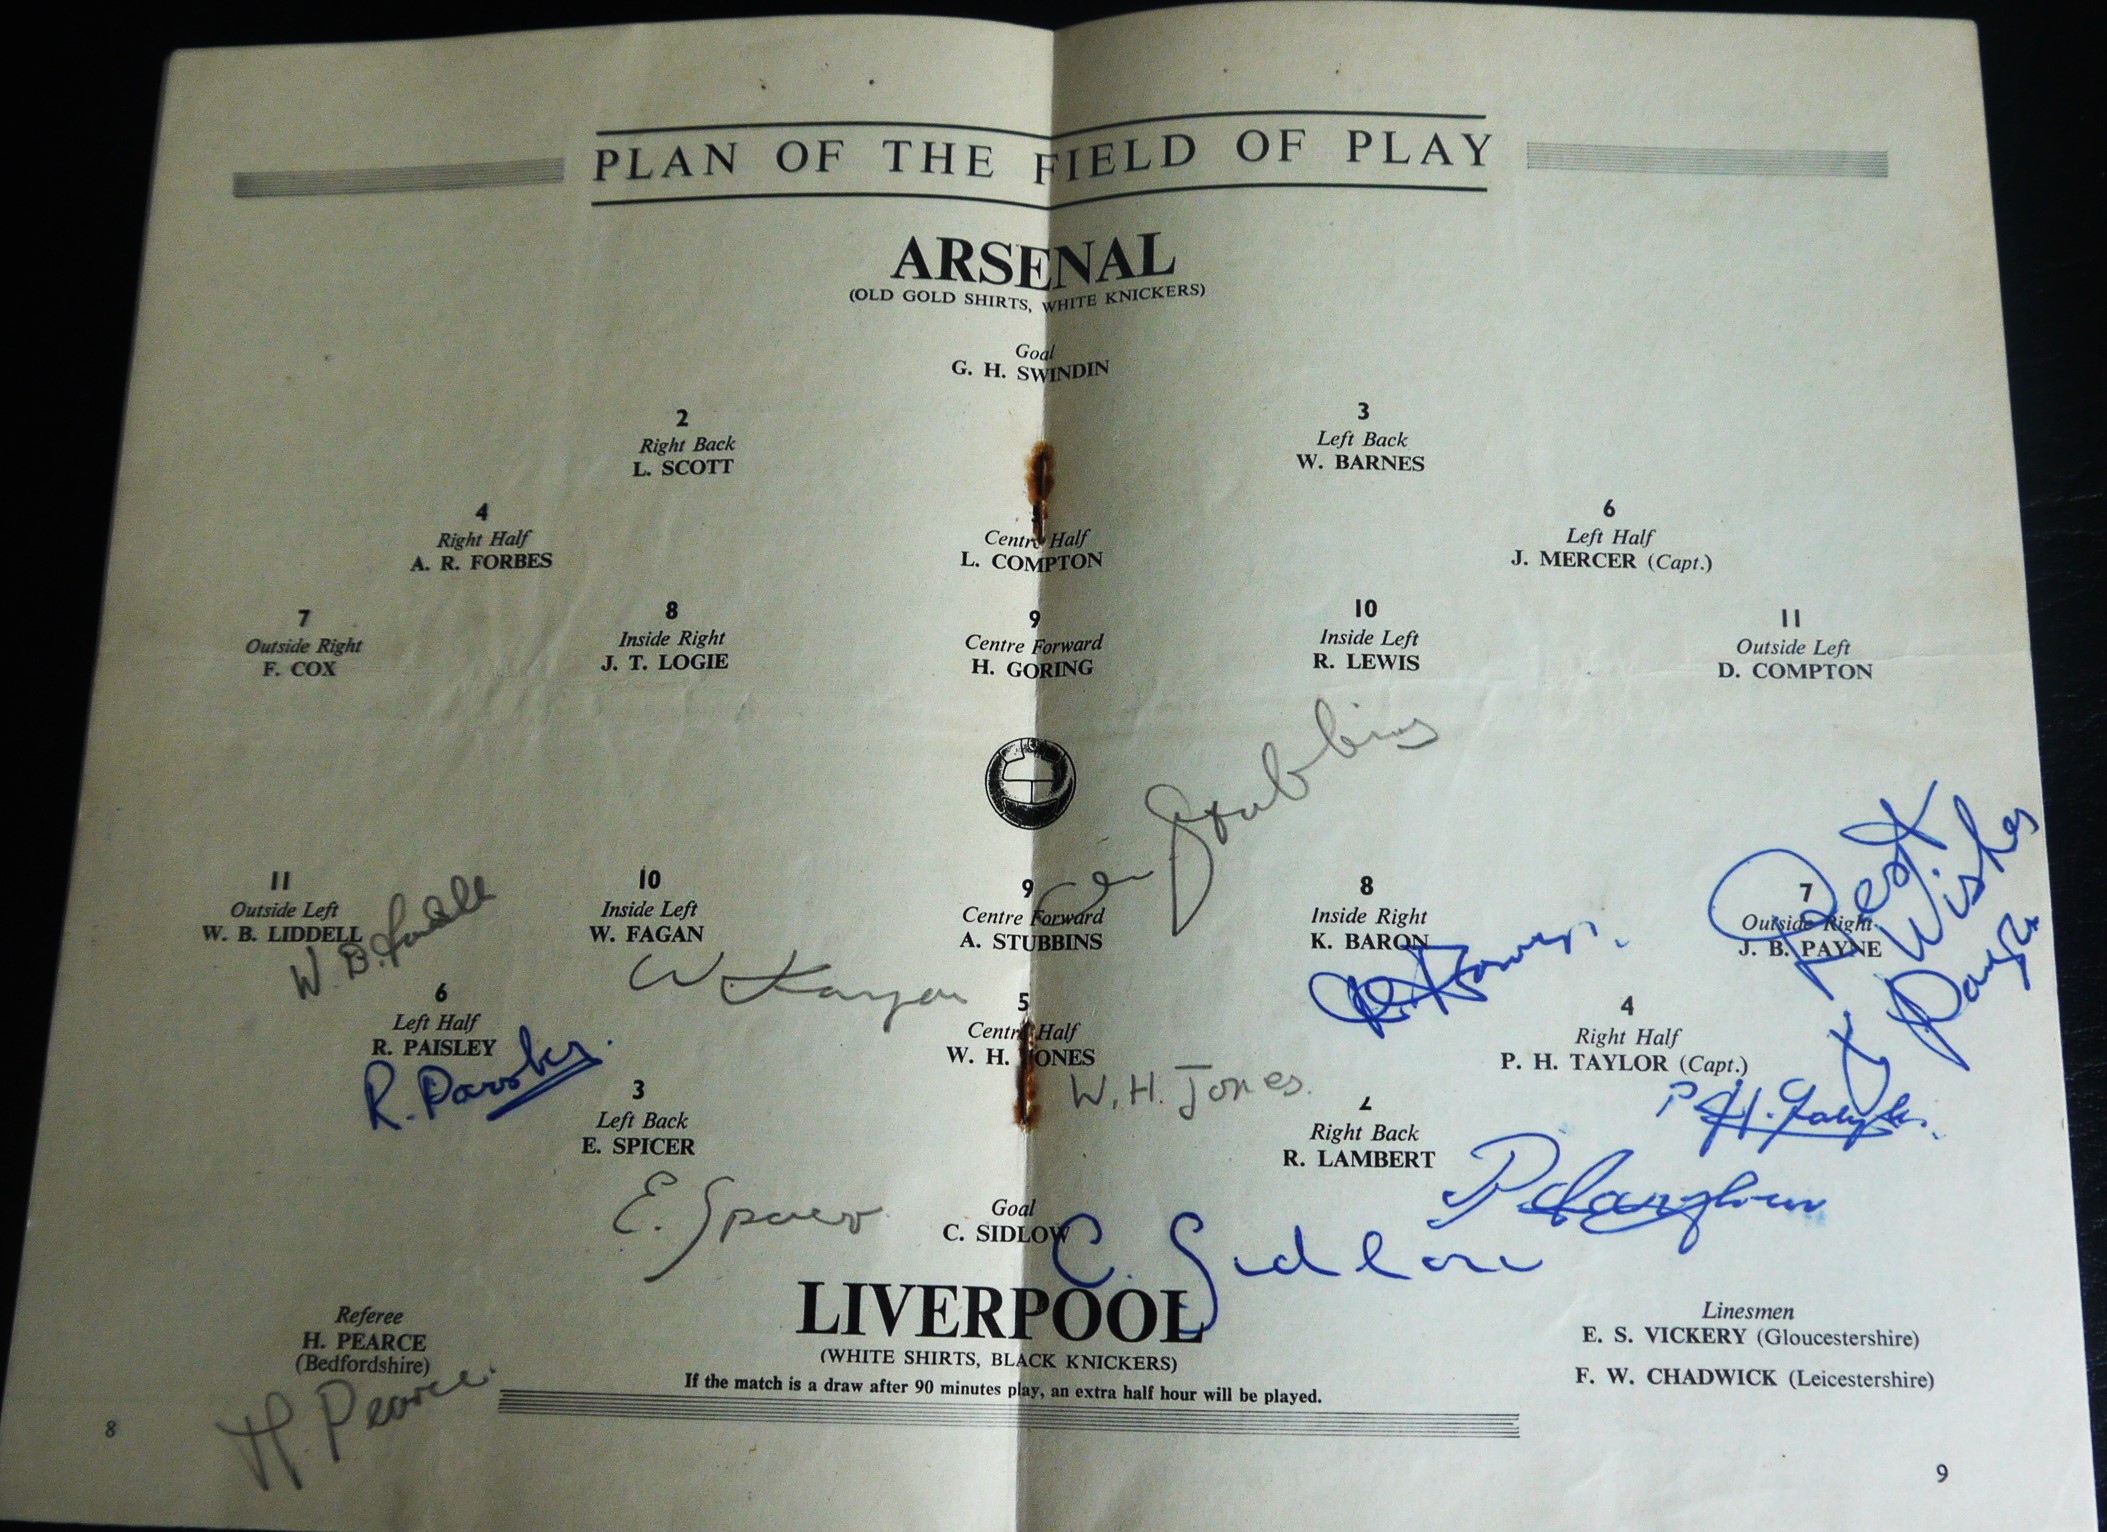 1950 FA CUP FINAL ARSENAL V LIVERPOOL PROGRAMME AUTOGRAPHED BY THE LIVERPOOL TEAM - Image 2 of 2